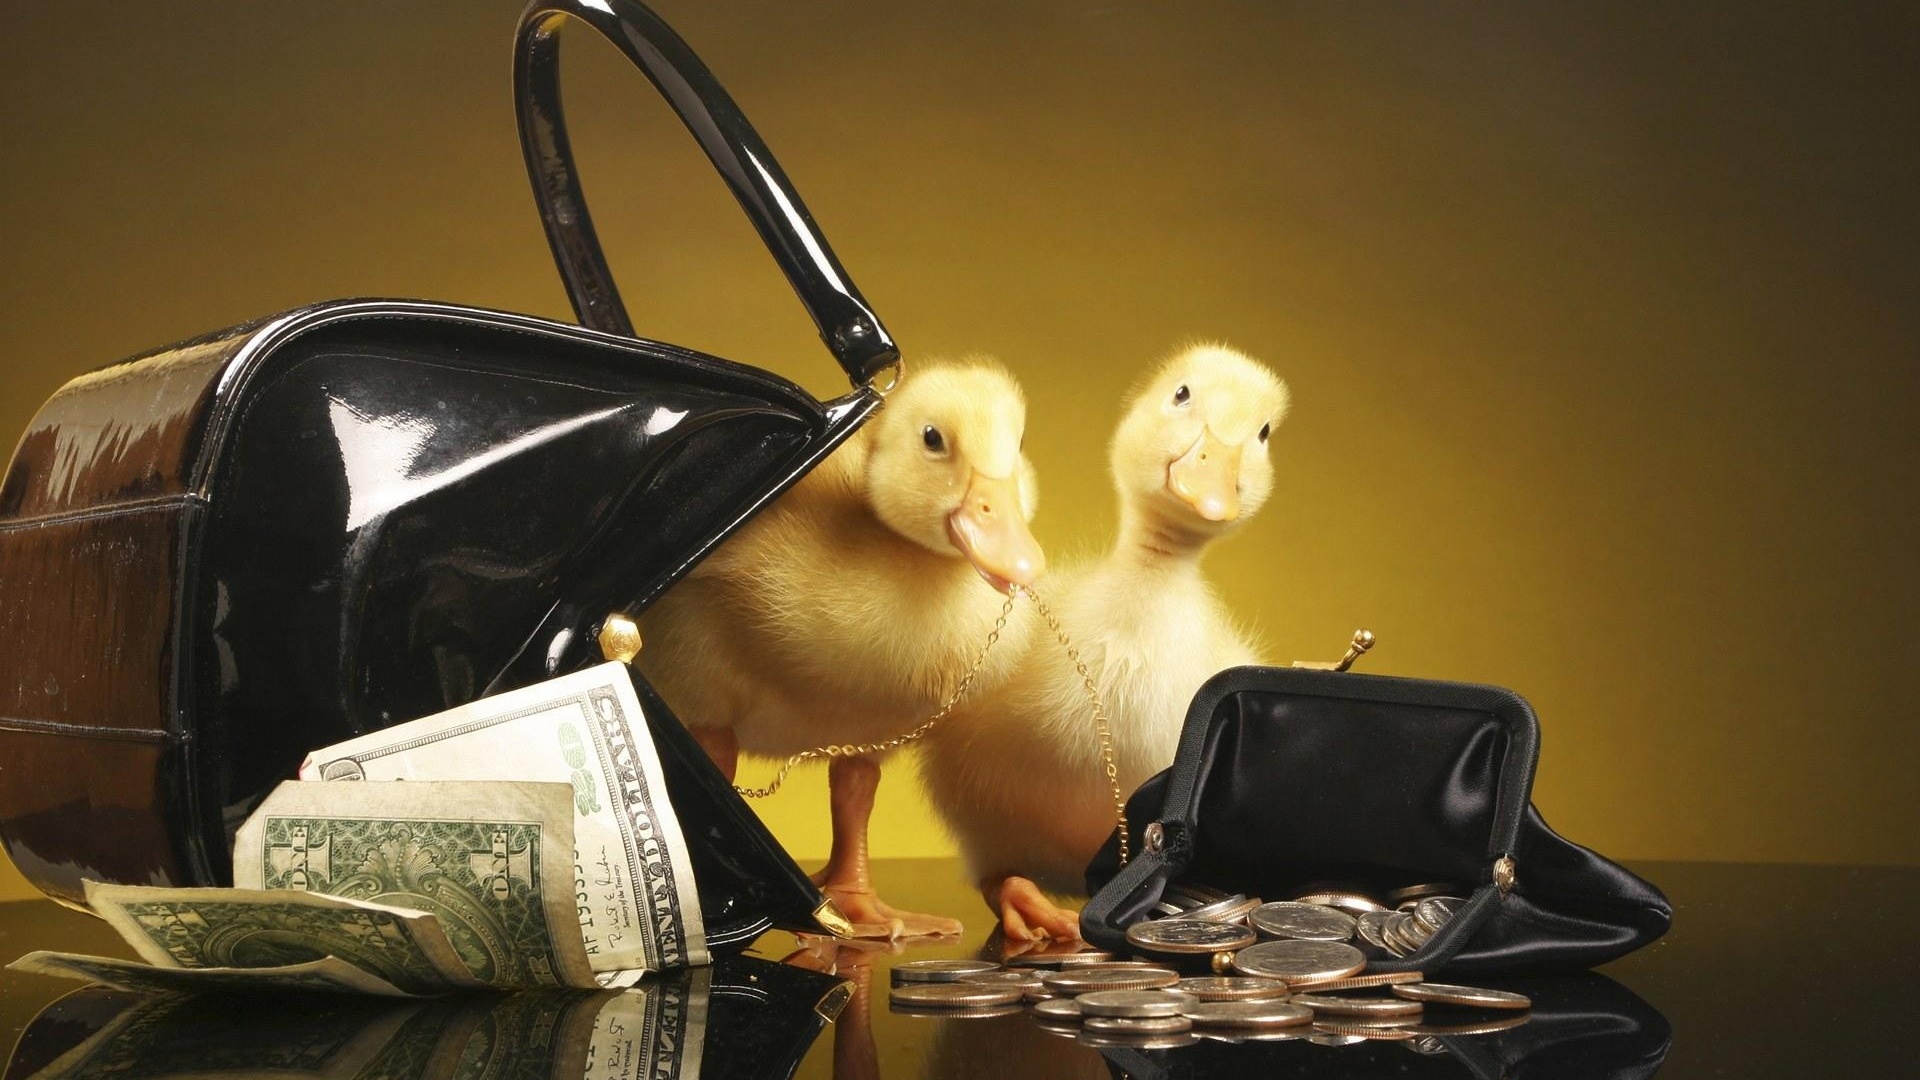 Ducklings with purse and money for 1920 x 1080 HDTV 1080p resolution